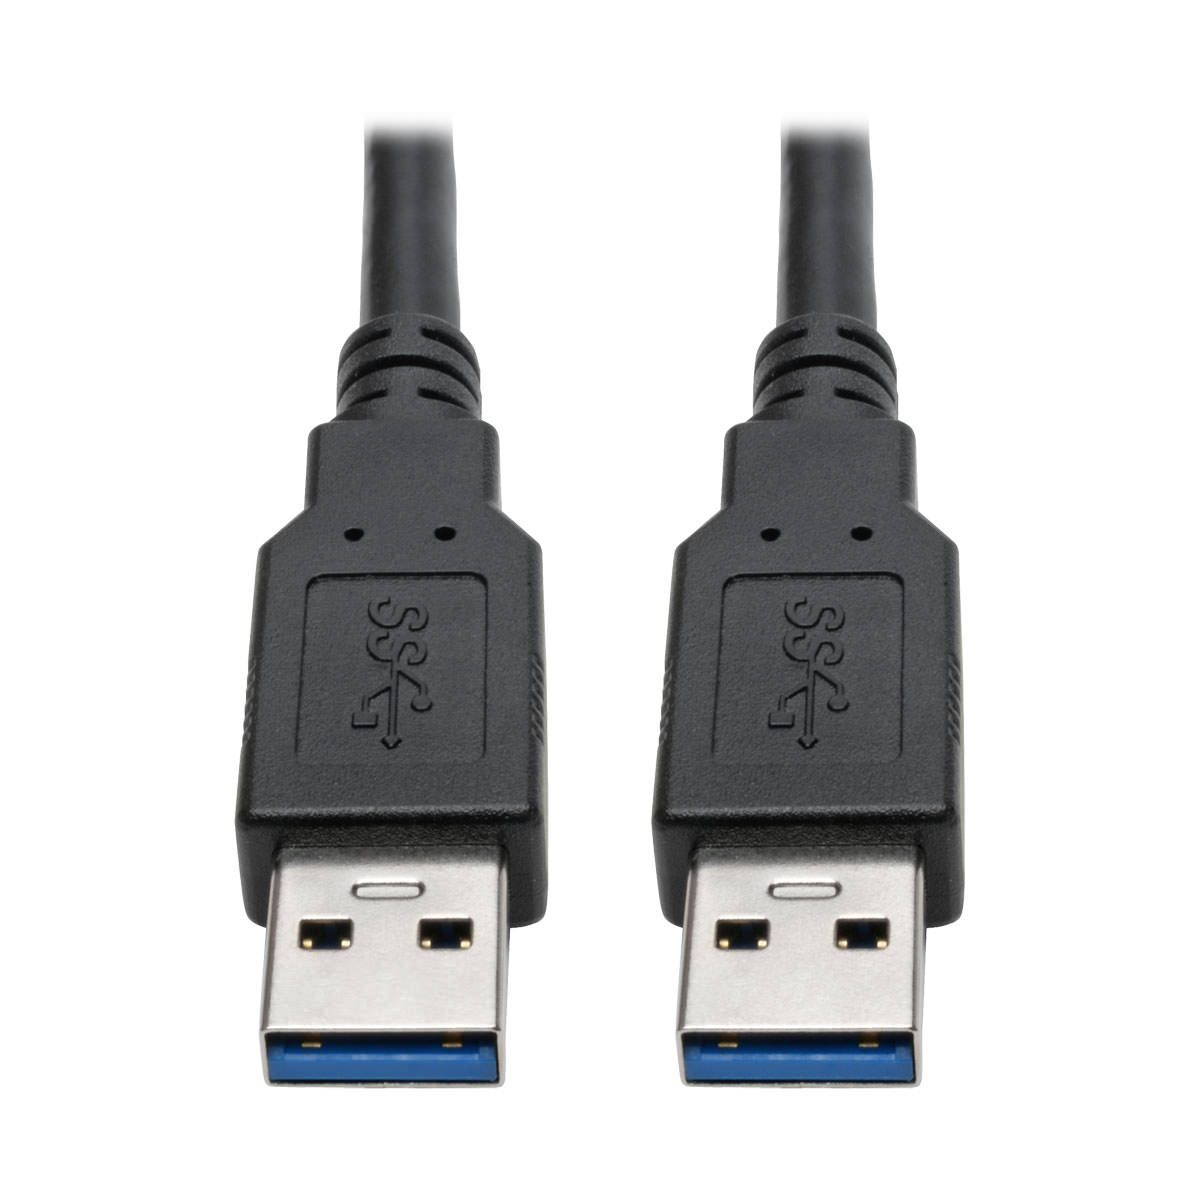 Tripp Lite USB 3.0 SuperSpeed A/A Cable for Tripp Lite USB 3.0 All-in-One Keystone/Panel Mount Couplers (M/M), Black, 3 ft. - image 2 of 4